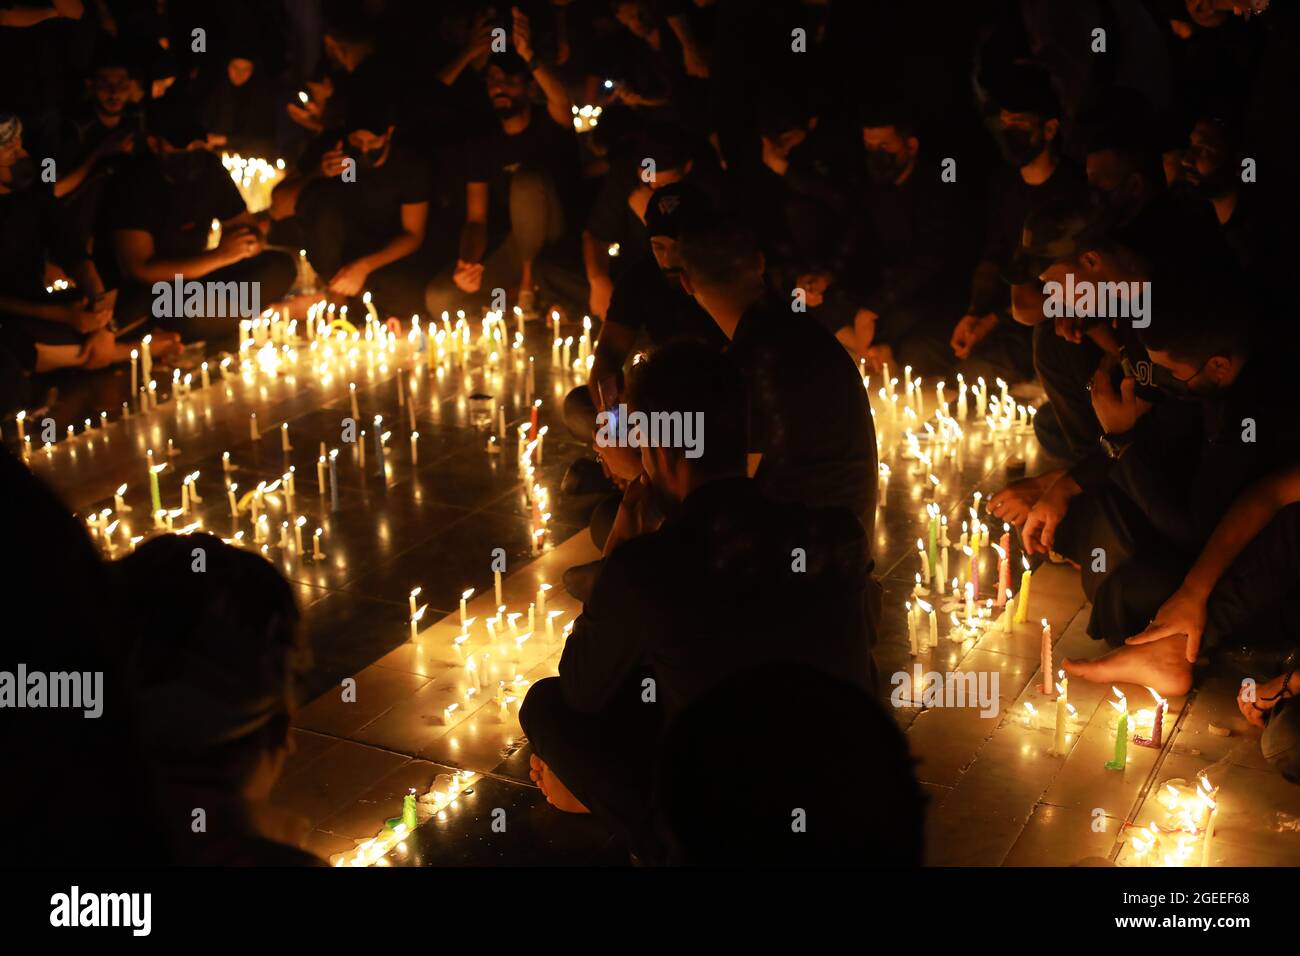 Karbala, Iraq. 19th Aug, 2021. Shiite Muslim worshippers light candles at the Imam Abbas shrine in Iraq's holy city of Karbala on Ashura Day on the 10th of Muharram, the first month of the Islamic calendar. Muharram is considered a month of mourning and remembrance for Shiite Muslims around the world, in which they commemorate the martyrdom of the grandson of the Islamic prophet Mohammad, Husayn ibn Ali, who was killed in the 7th century Battle of Karbala. Credit: Ameer Al Mohammedaw/dpa/Alamy Live News Stock Photo